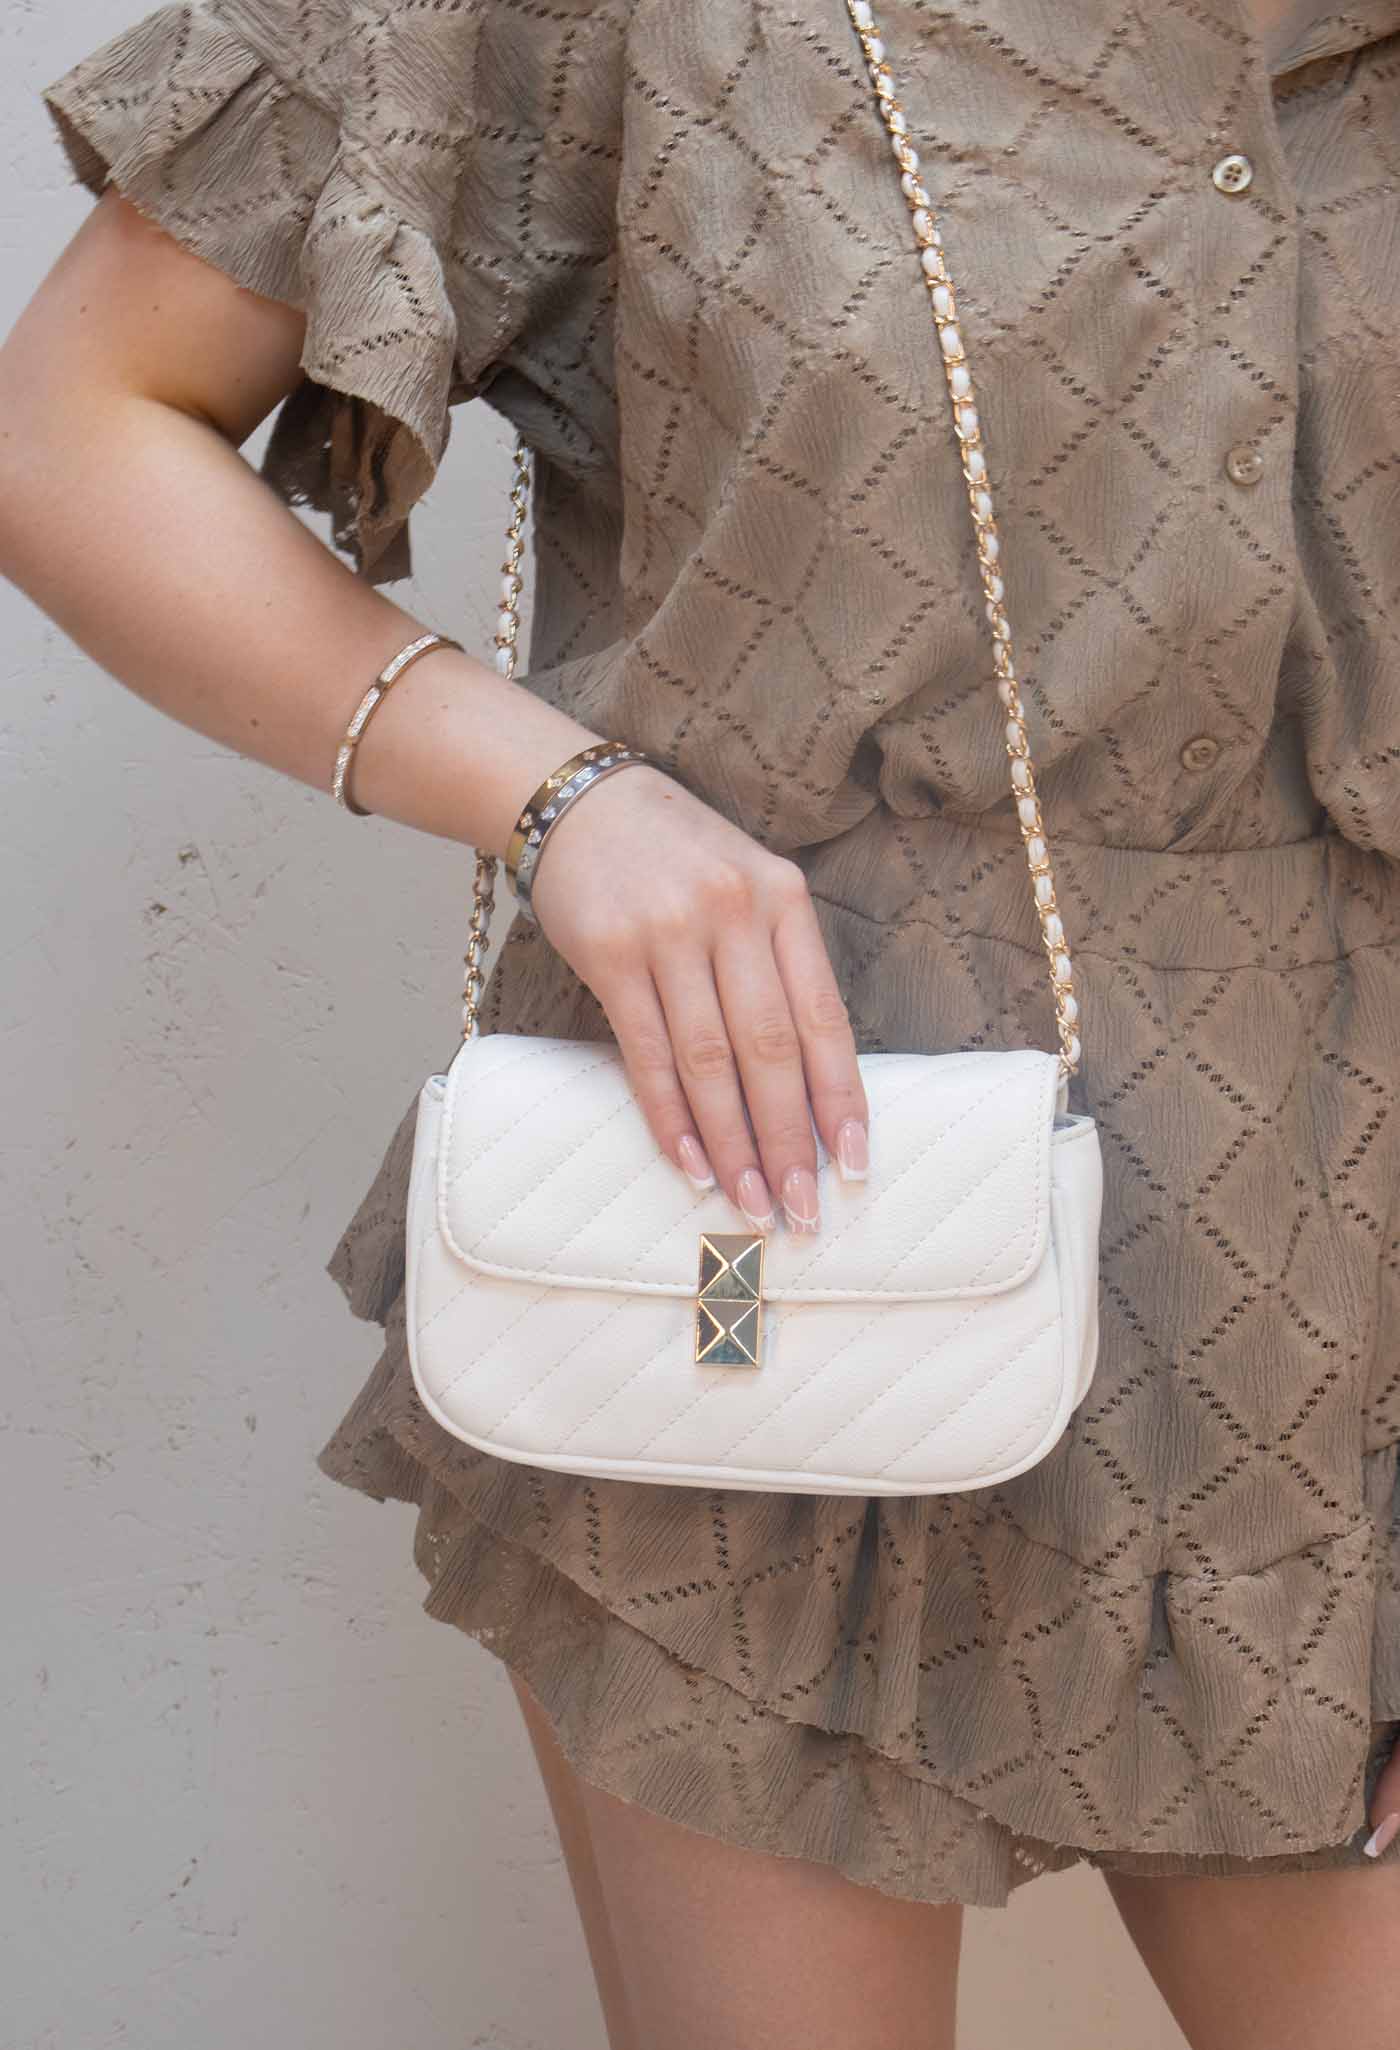 Quilted Patterned PU Leather Cross-Body White Bag